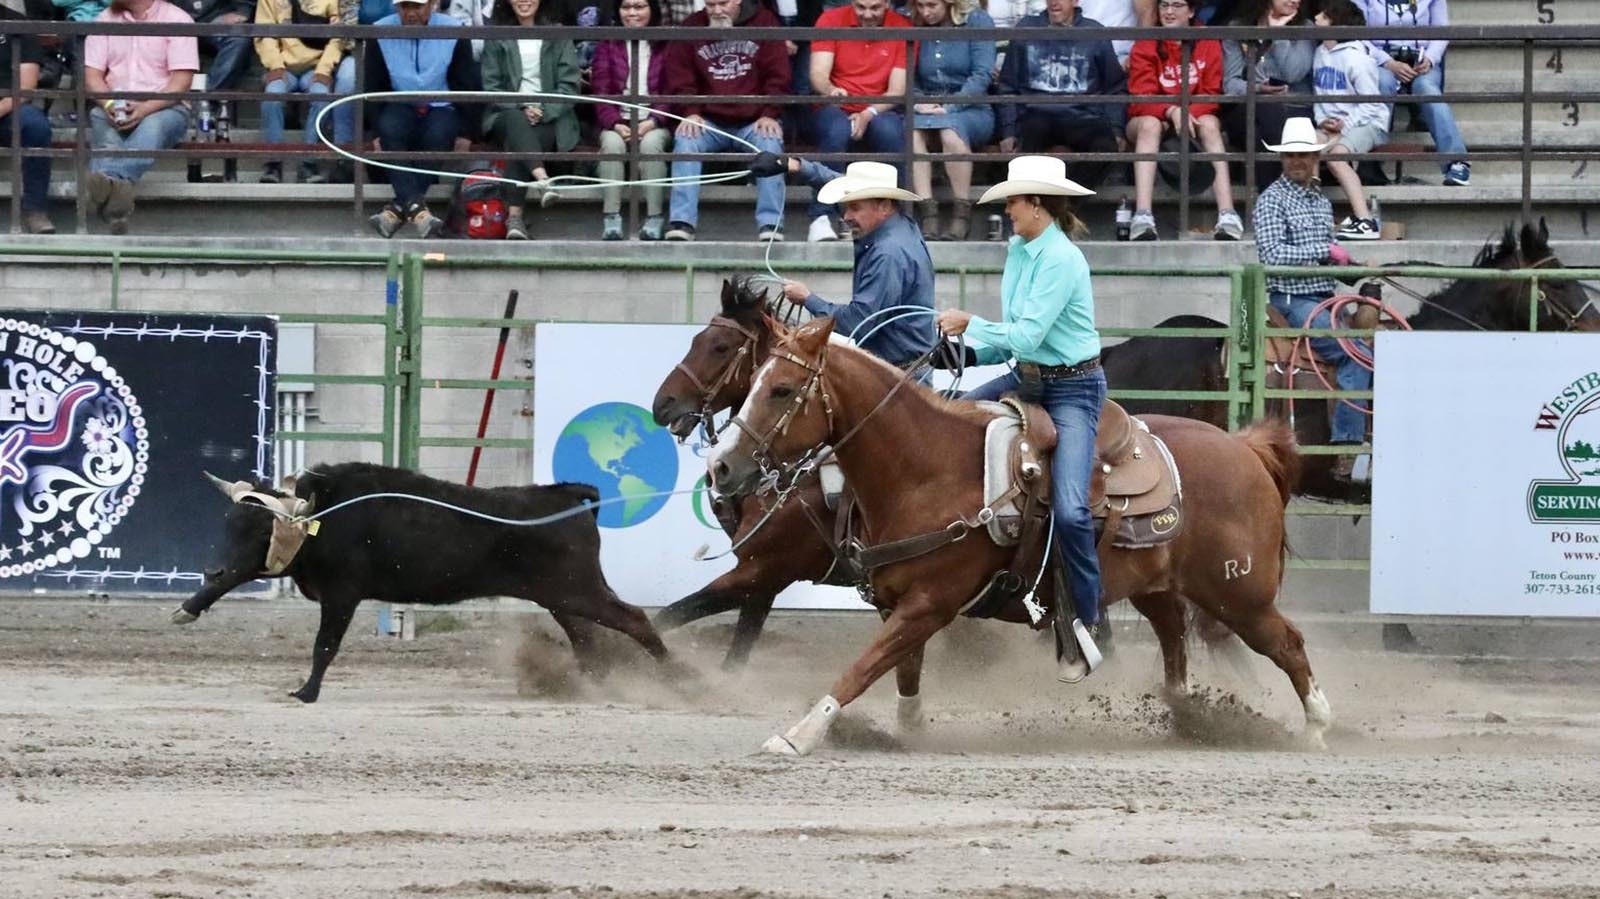 Rodeo Team roping is the only event that makes no distinction for gender participation JH Rodeo 6 22 24